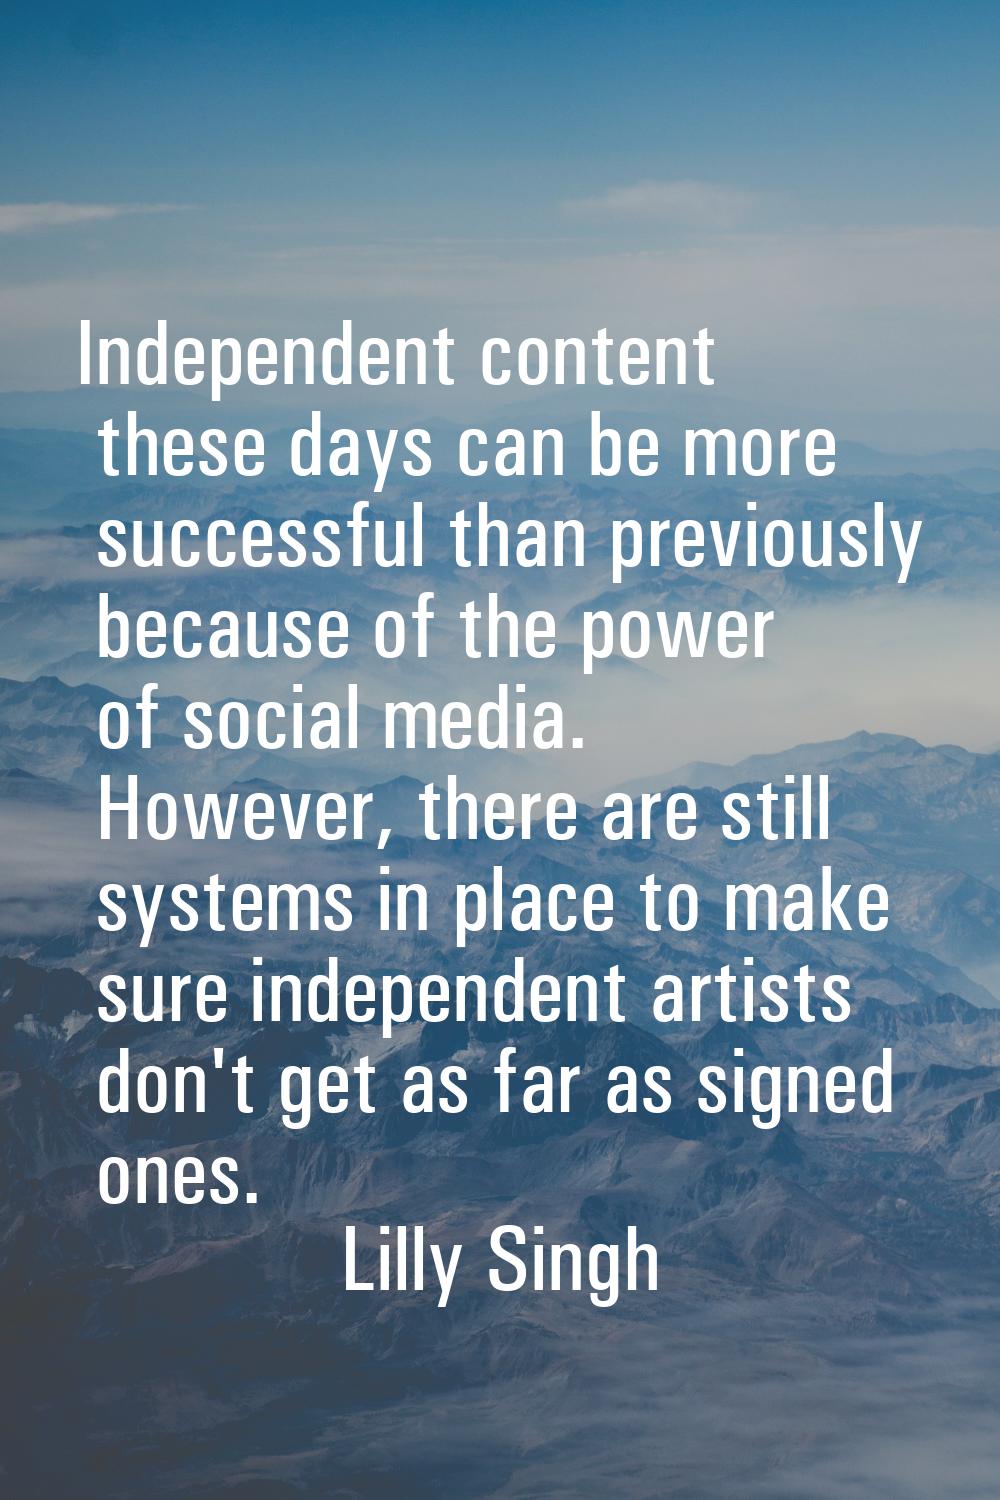 Independent content these days can be more successful than previously because of the power of socia